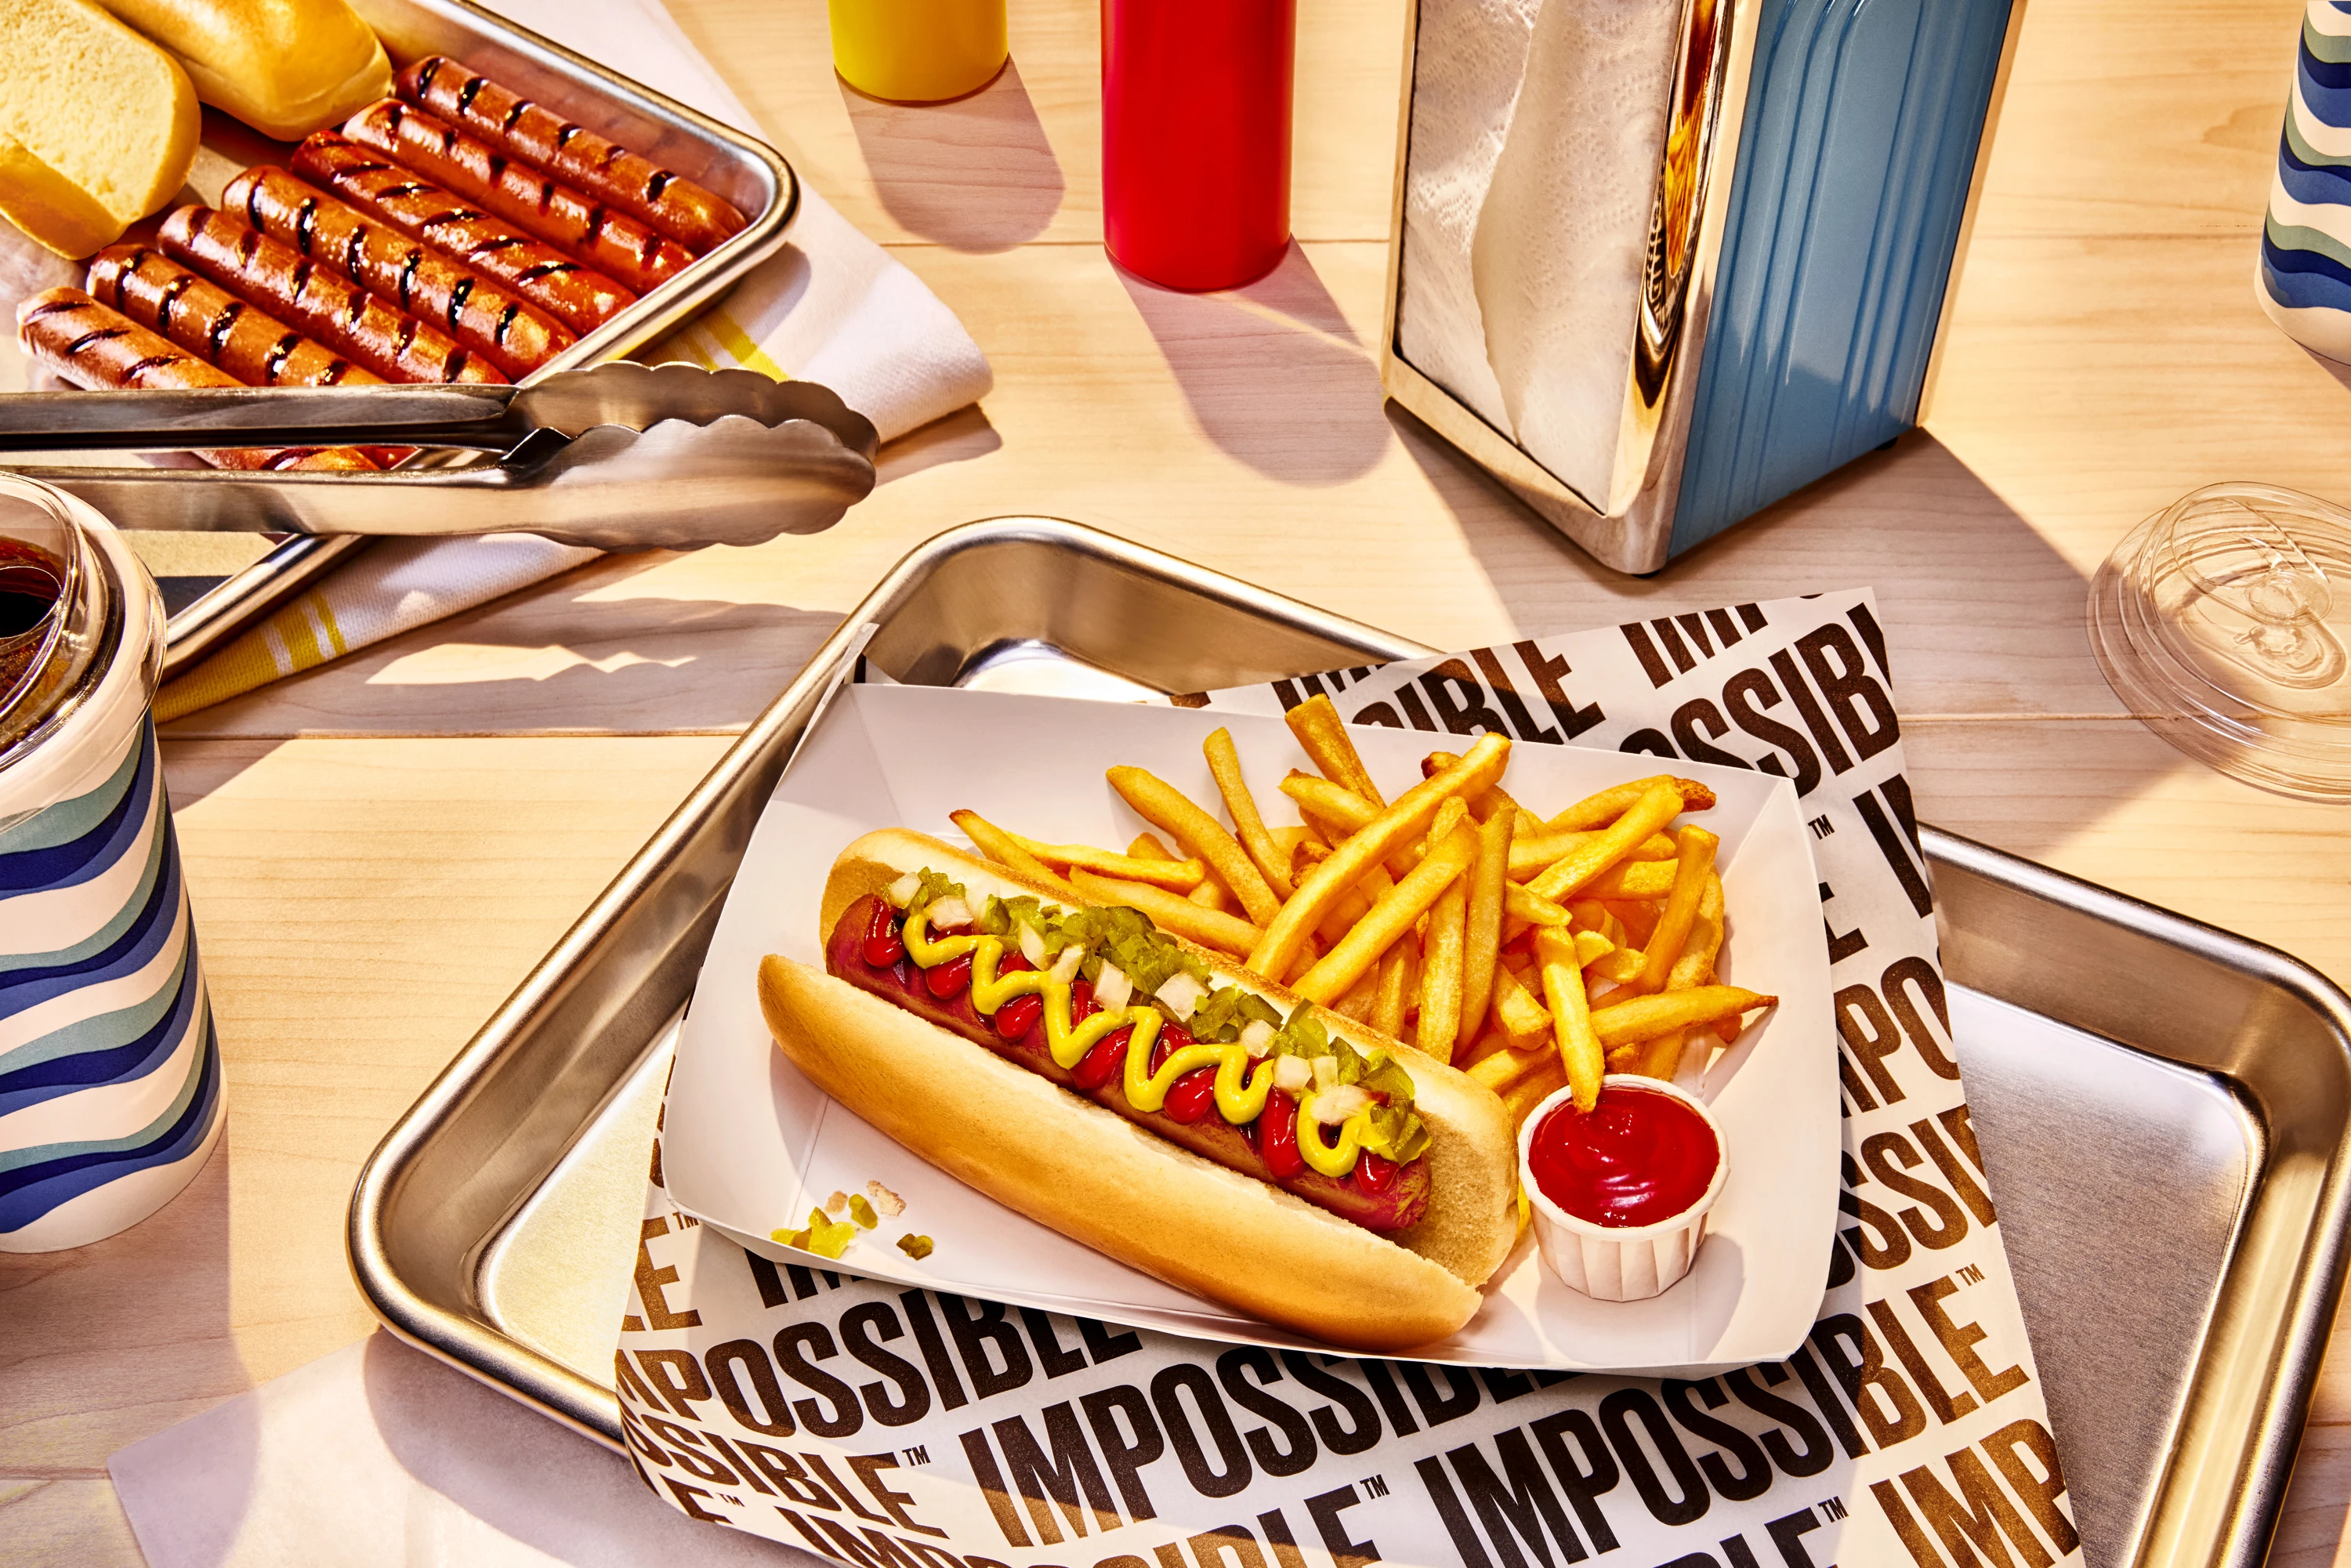 hotdog with mustard, onions, and relish on it. Sitting with french fries and side of ketchup on a paper bowl on top of impossible foods logos paper in a metal tray on a diner table. 